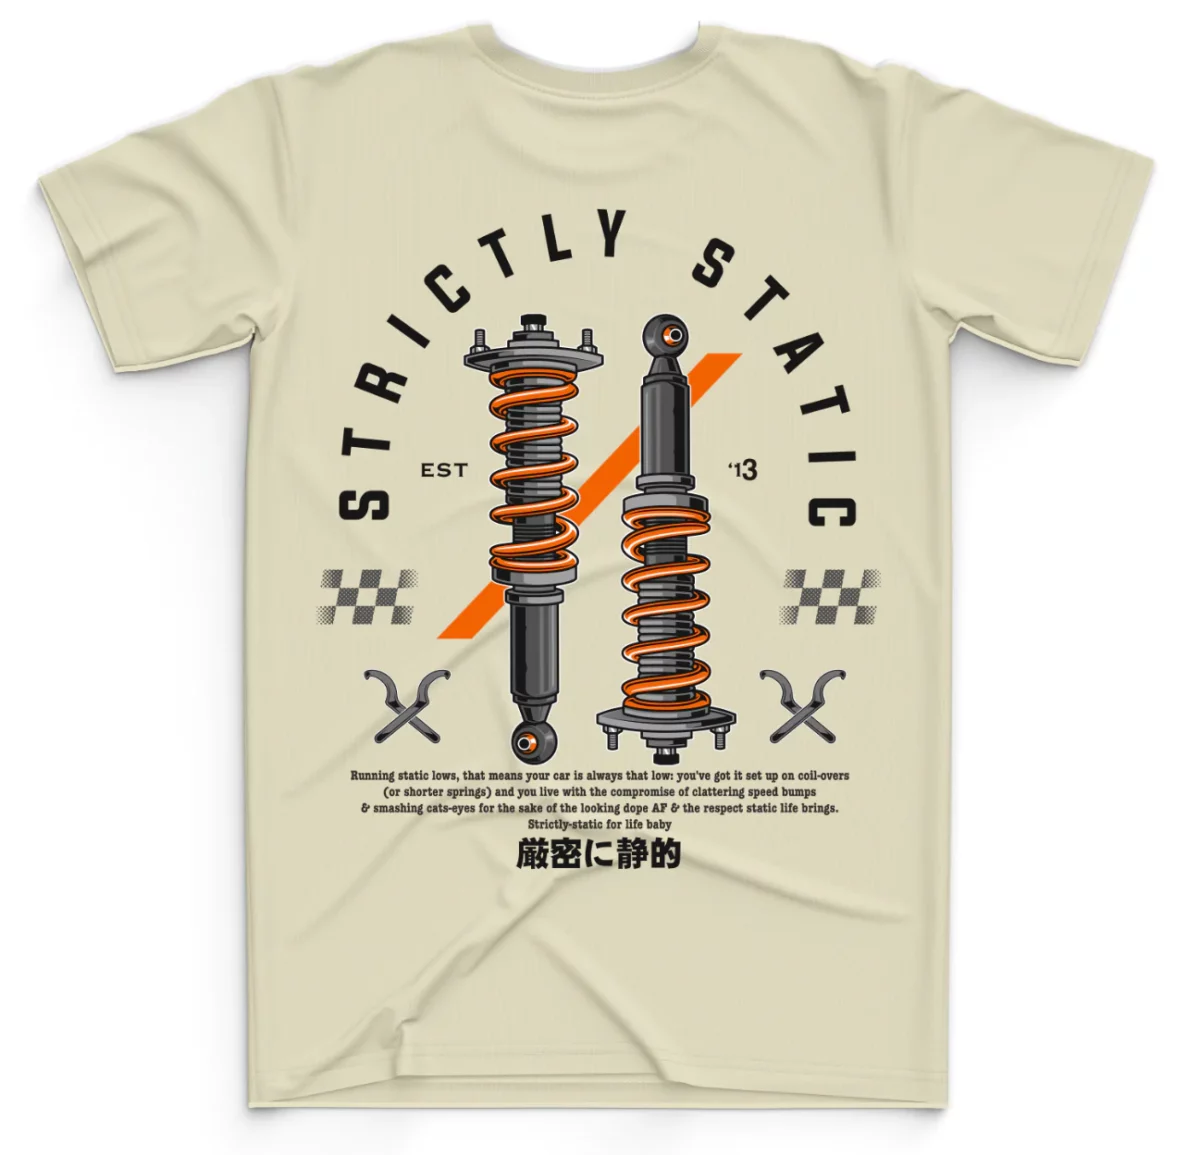 Strictly Static suspenion t shirt